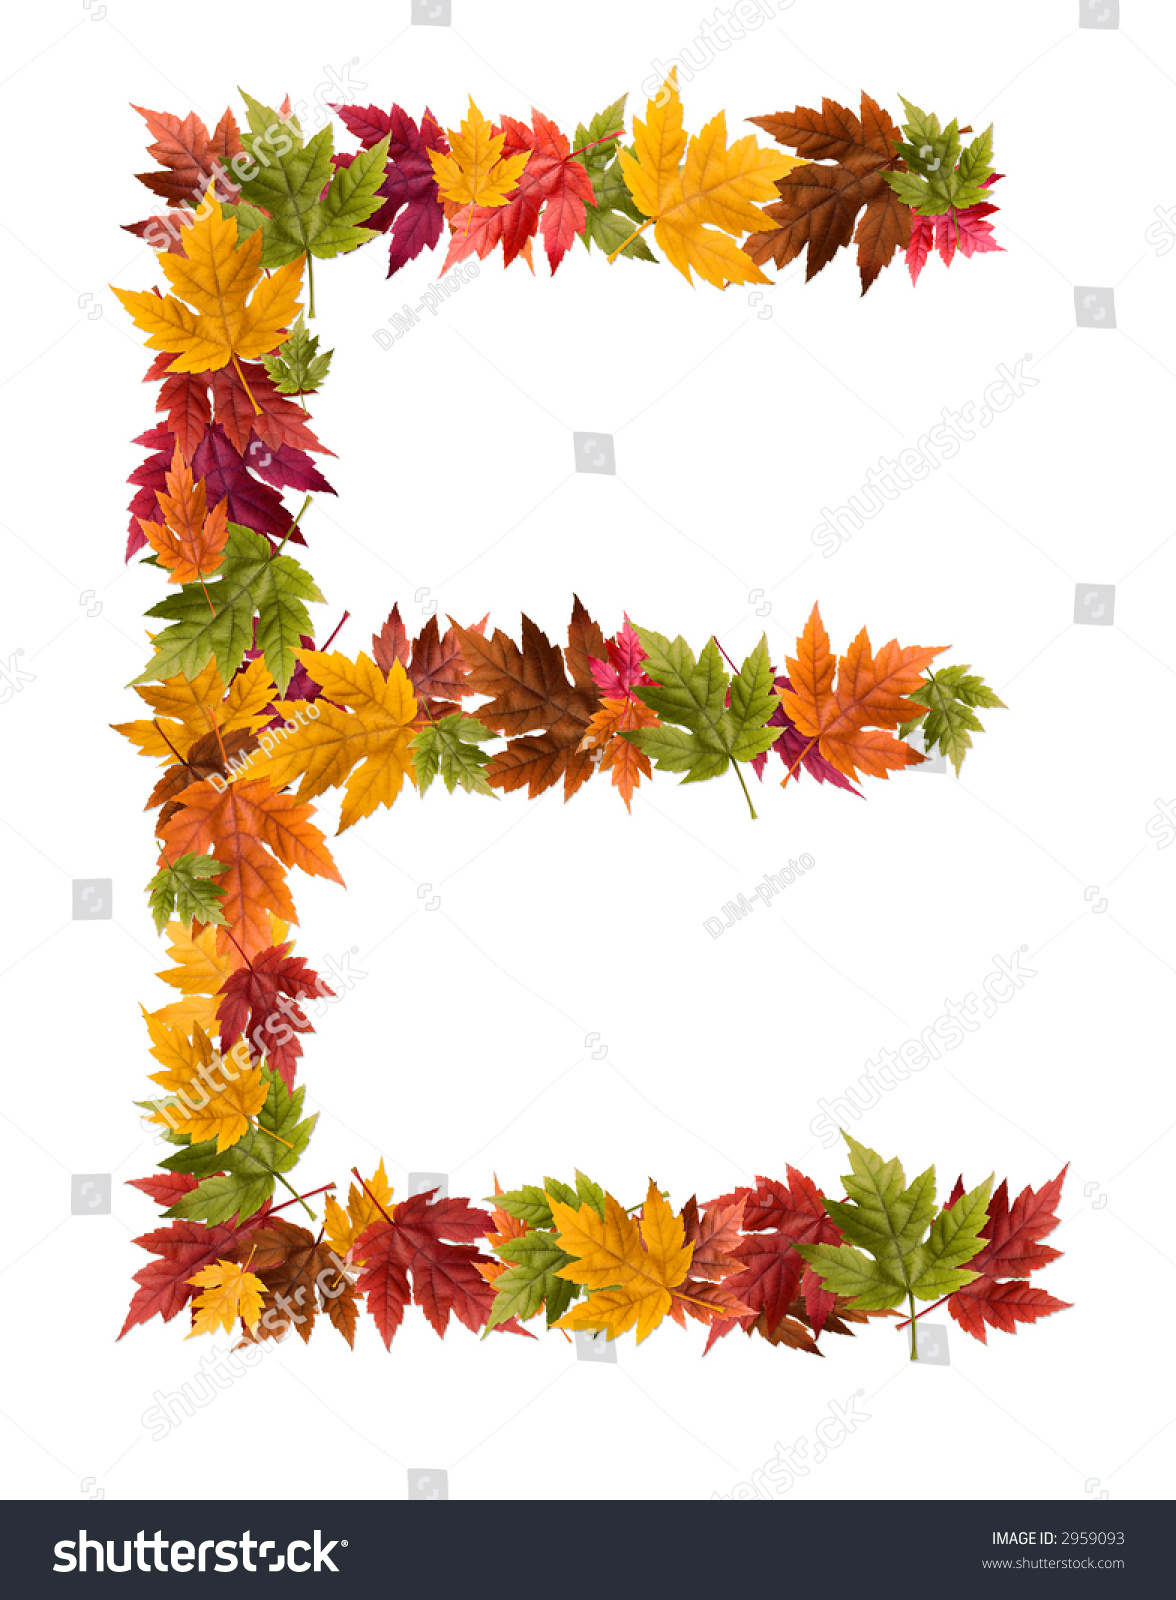 The Letter E Made From Autumn Maple Tree Leaves. Stock Photo 2959093 ...